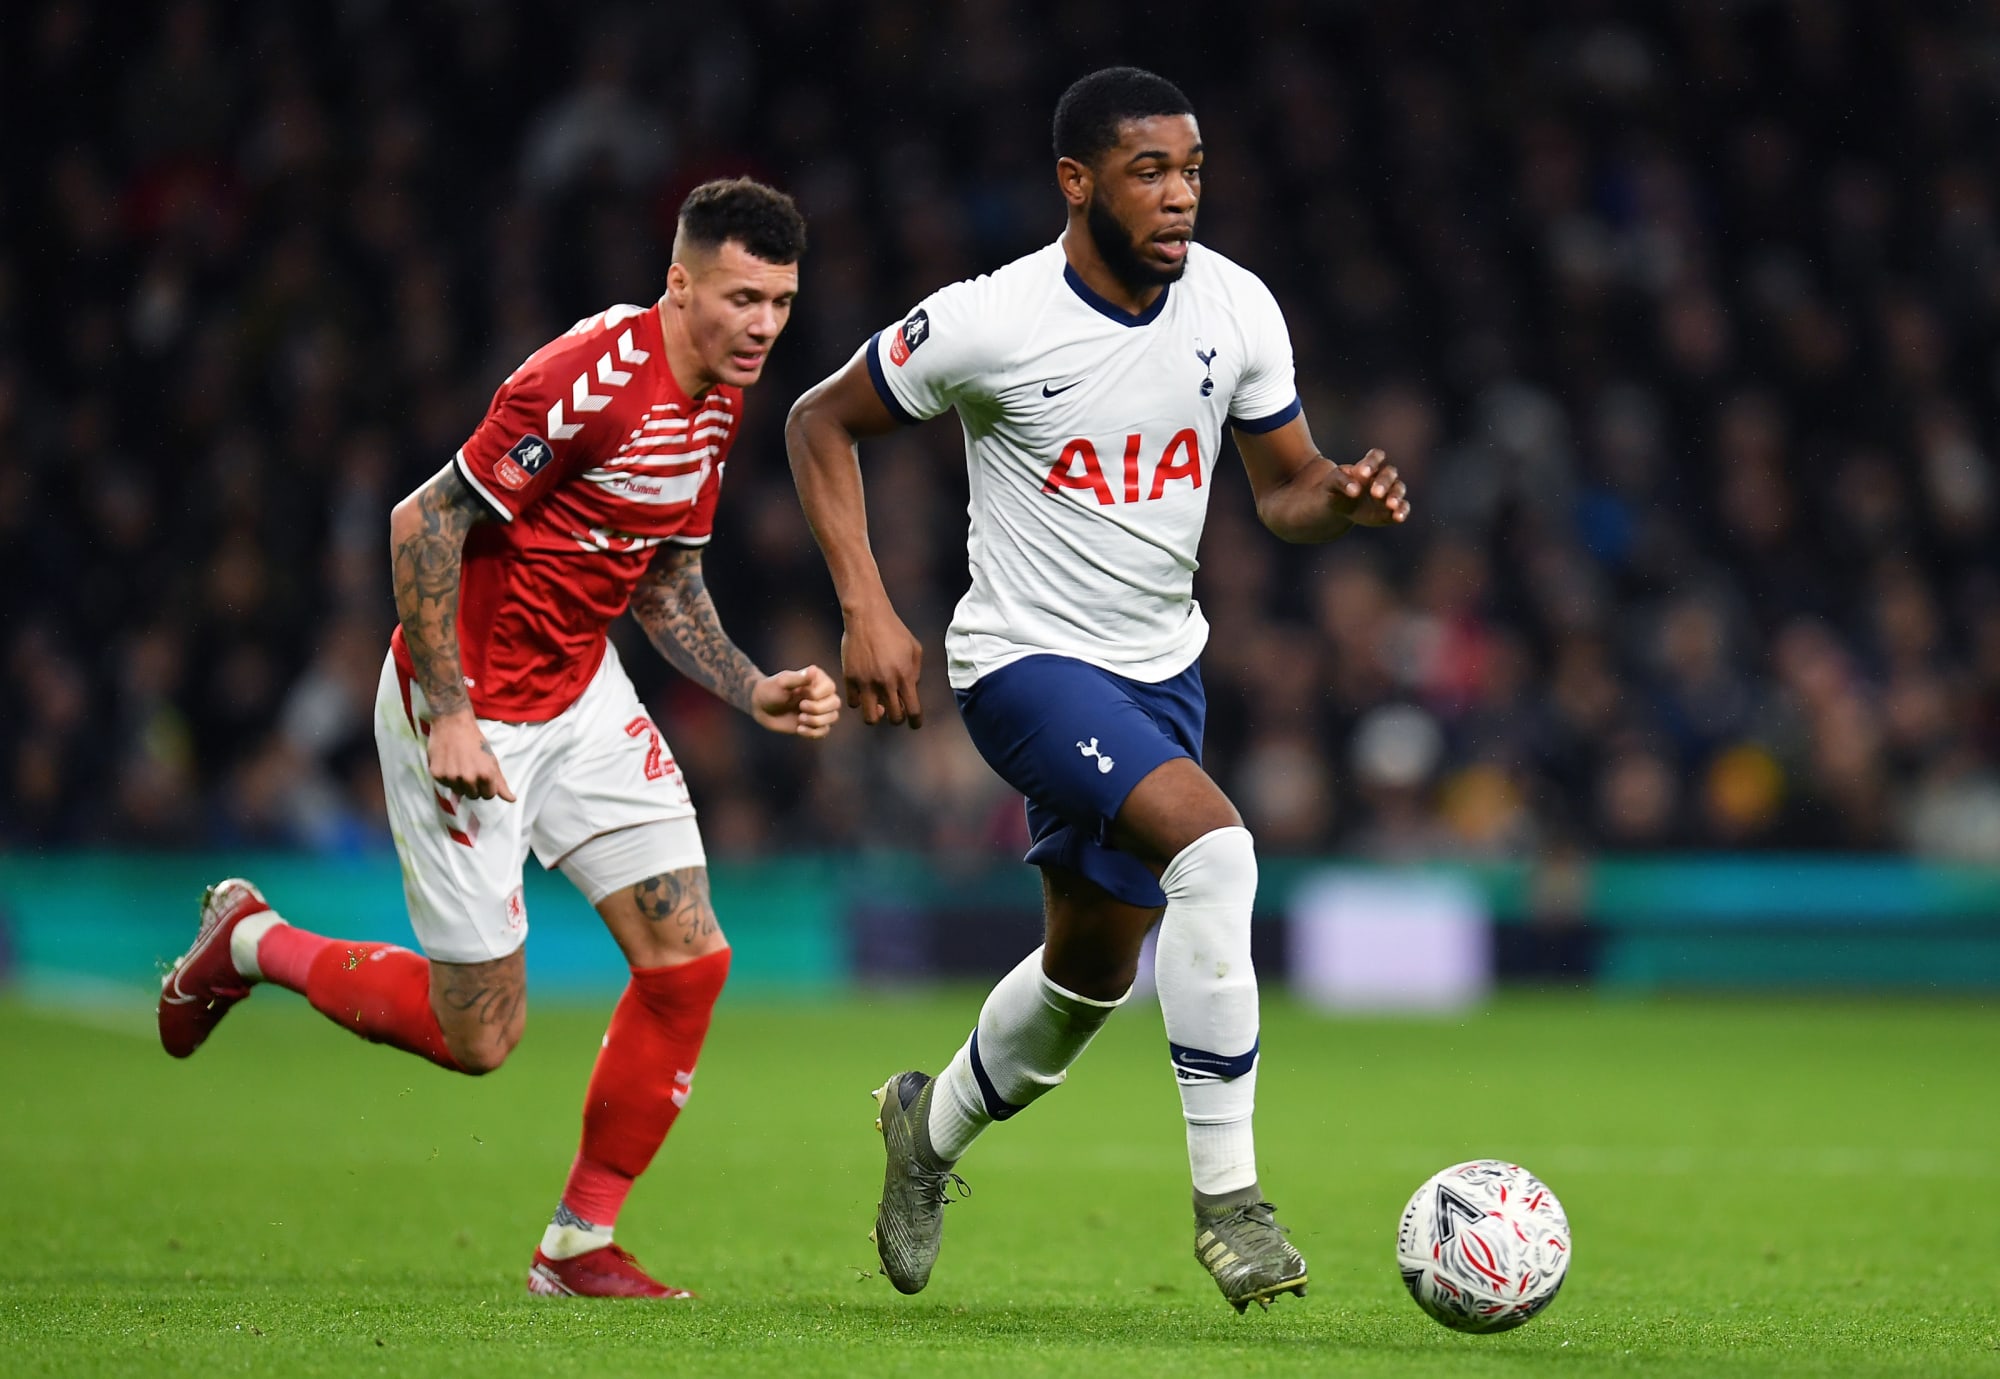 Tottenham must prioritize signing a defender whose contract is running out